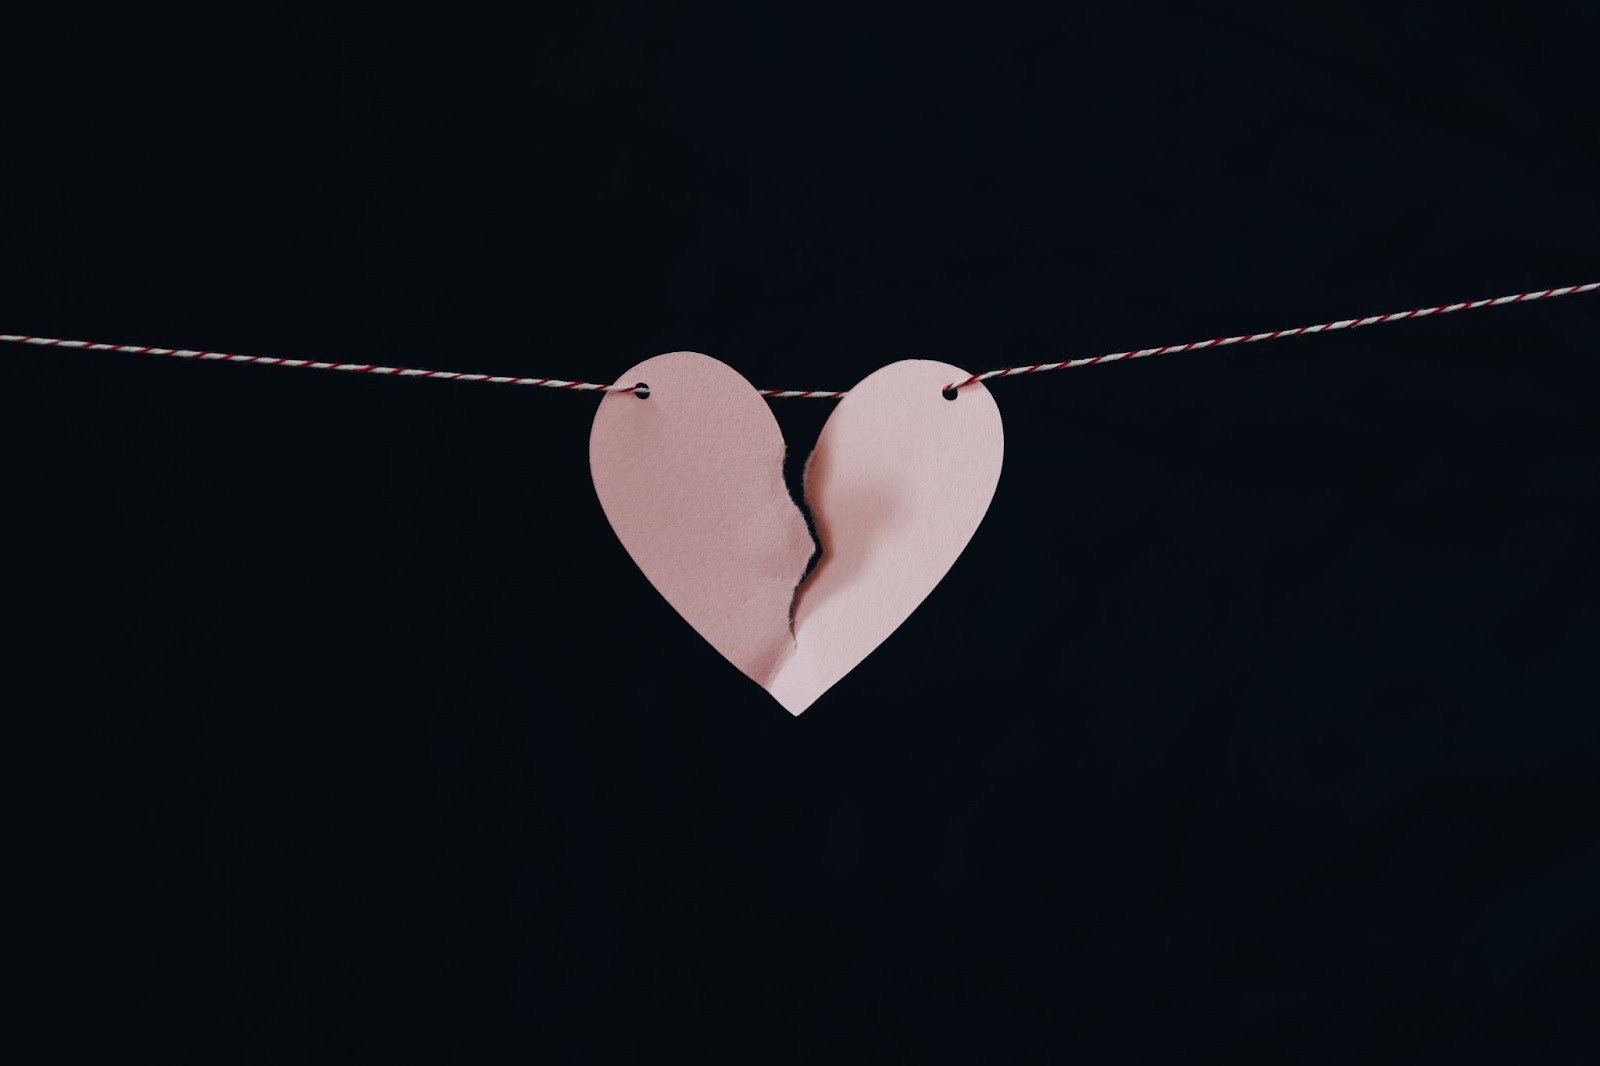 A pink, paper heart with a tear halfway down the middle, threaded onto a red and white string. This is all against a plain black background.